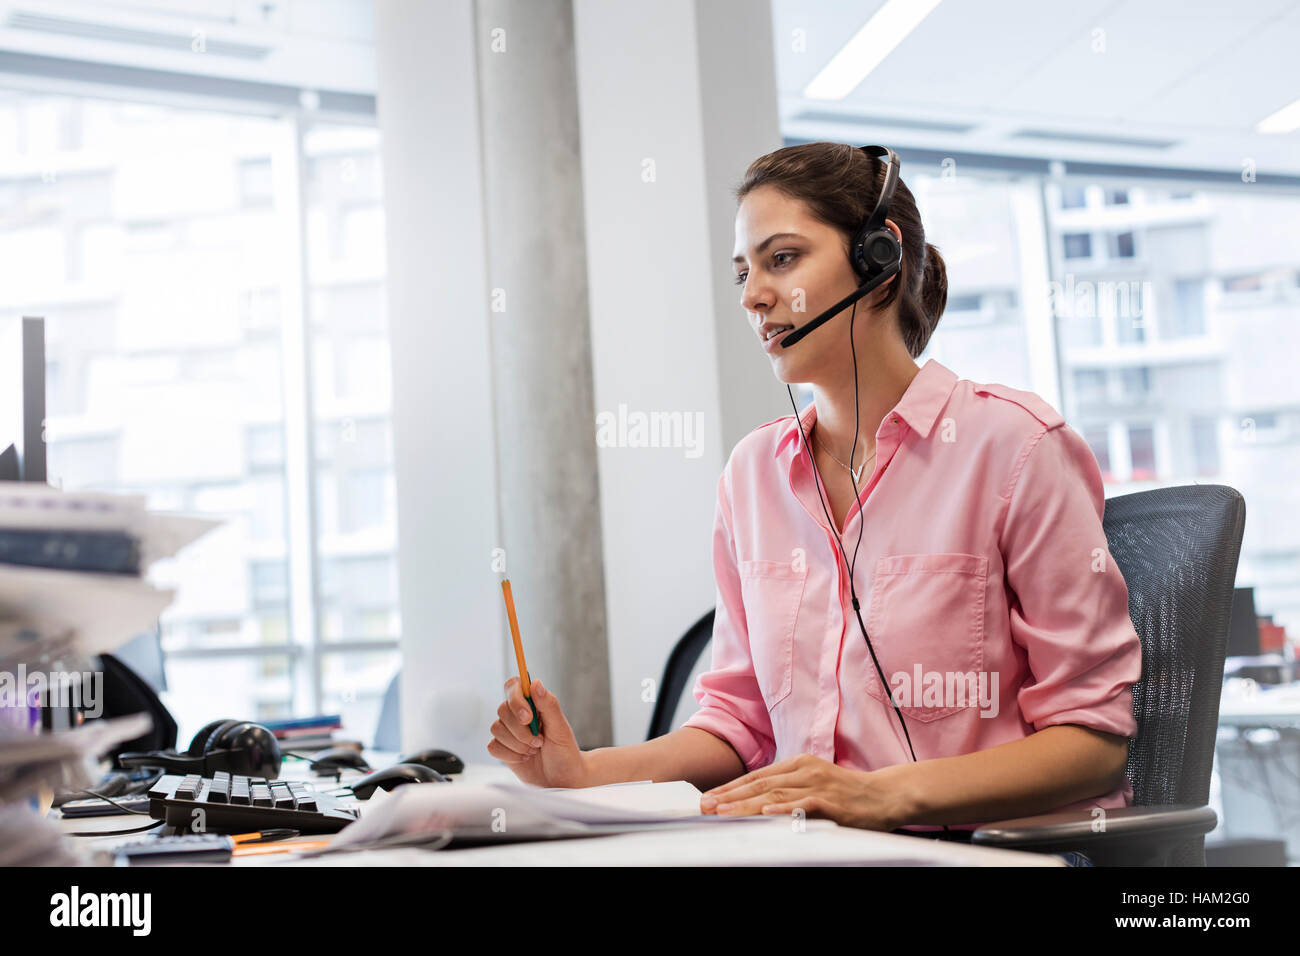 Businesswoman with hands-free device talking on telephone at office desk Stock Photo